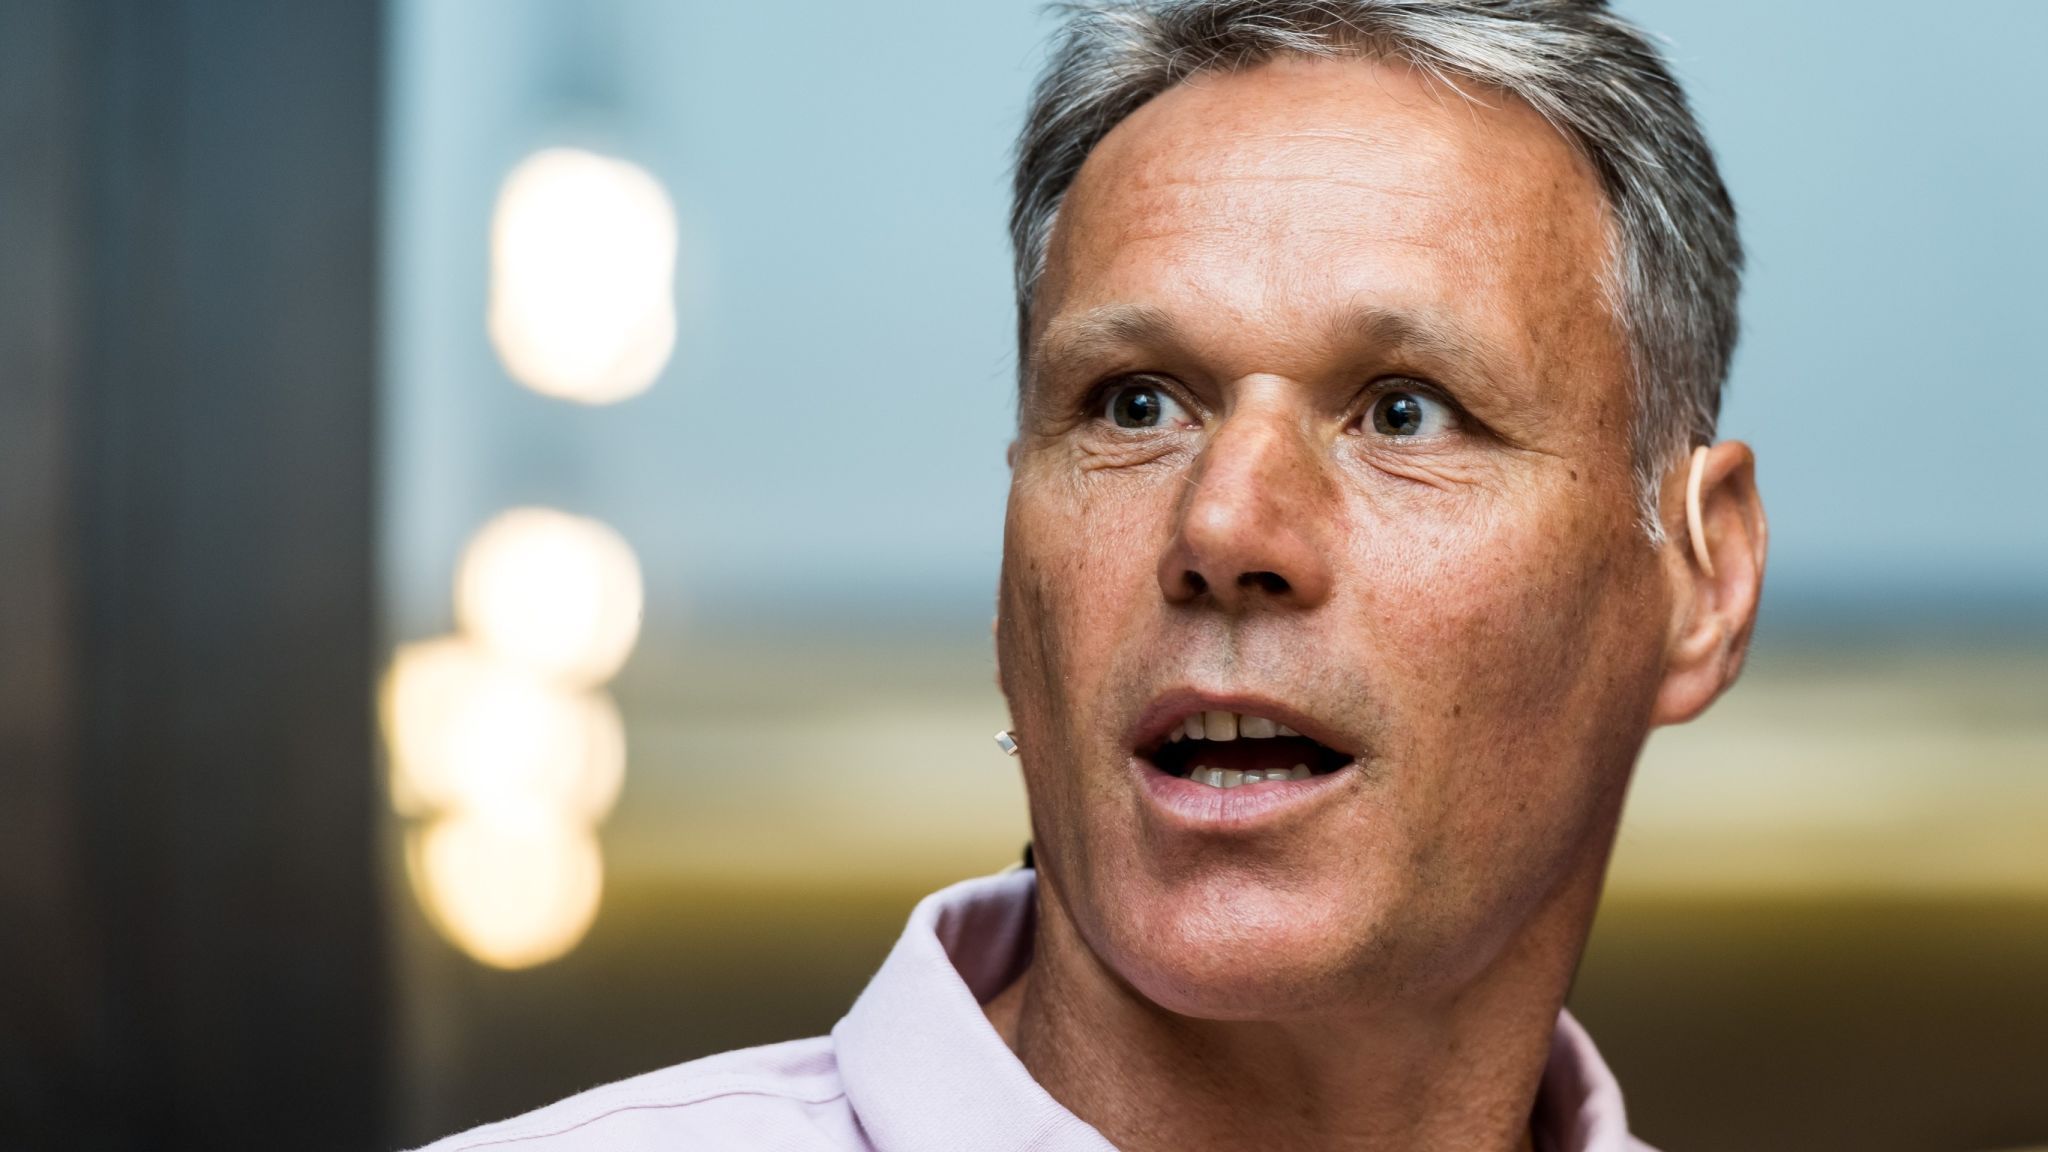 Marco van Basten removed from FIFA after on-air comments - FIFA 20 -  Gamereactor